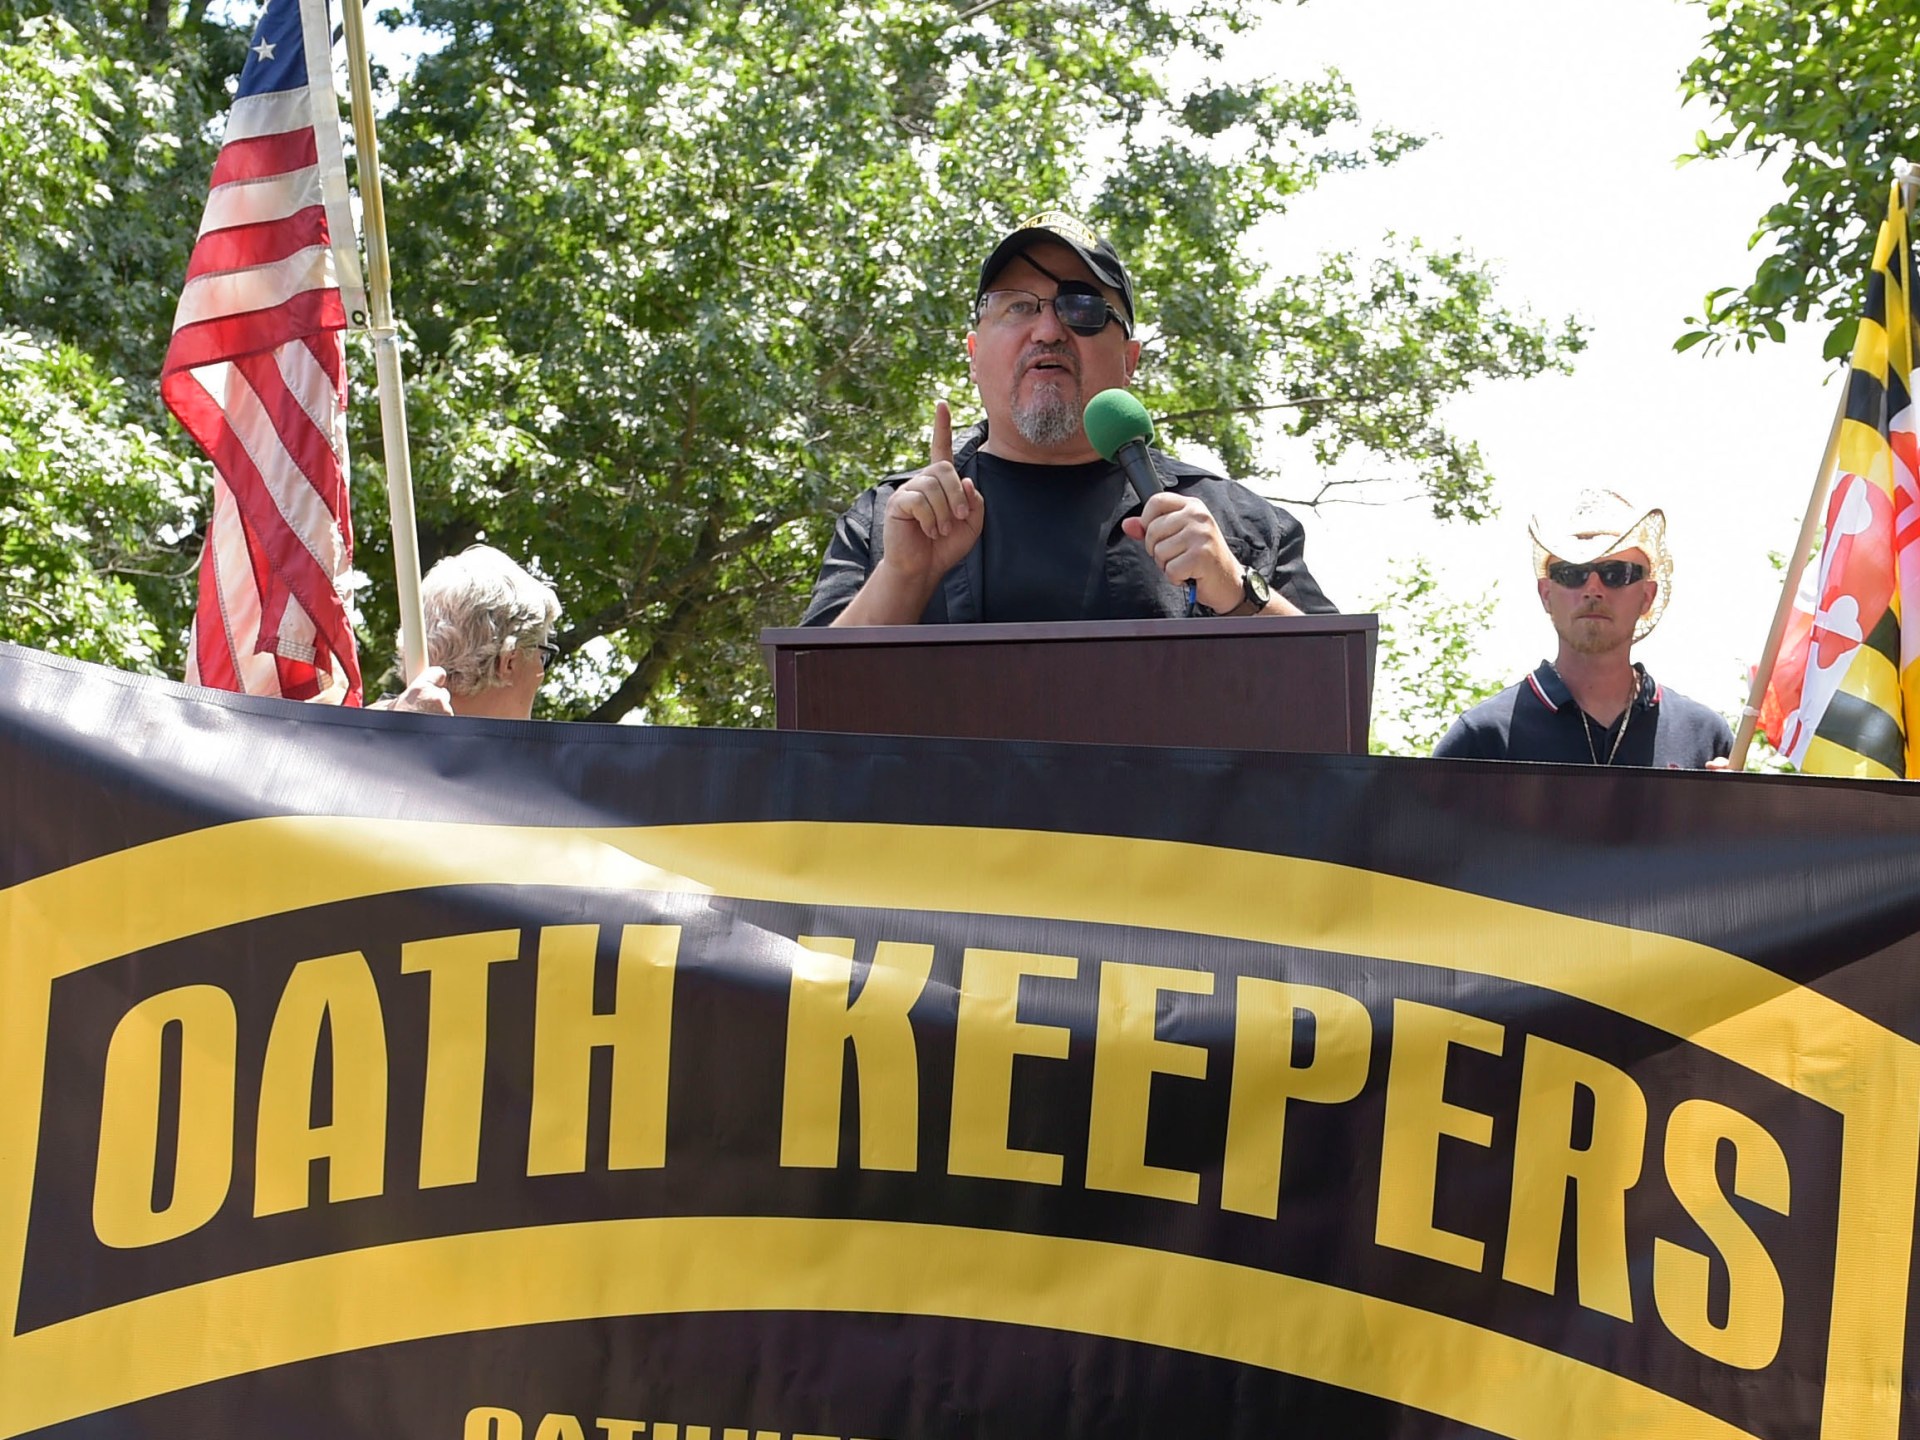 Trial begins for Oath Keepers charged in Jan 6 US Capitol riot